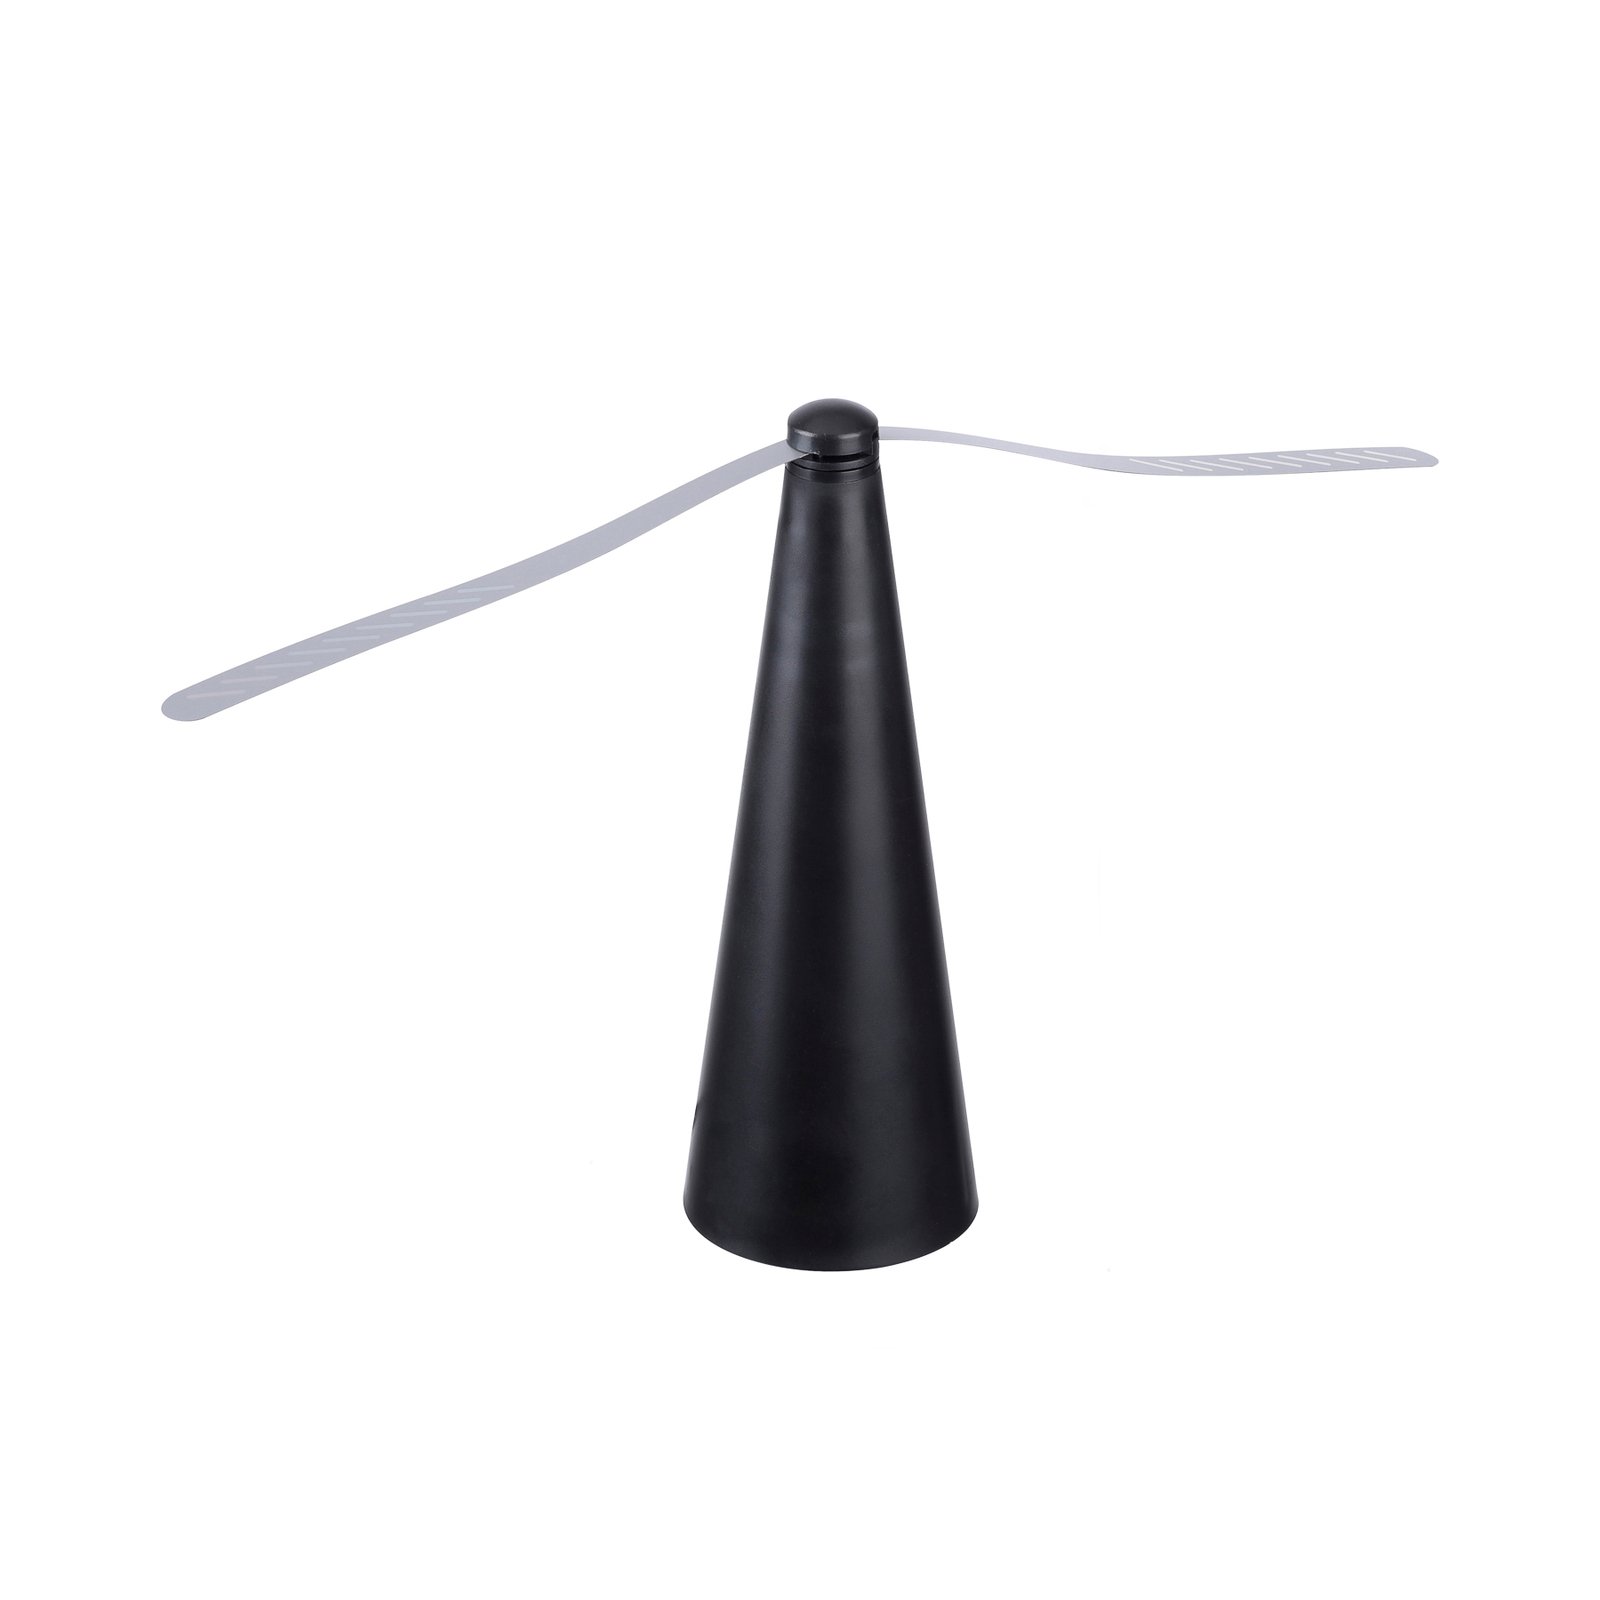 JUST LIGHT. Swat fly whisk, black, battery-operated